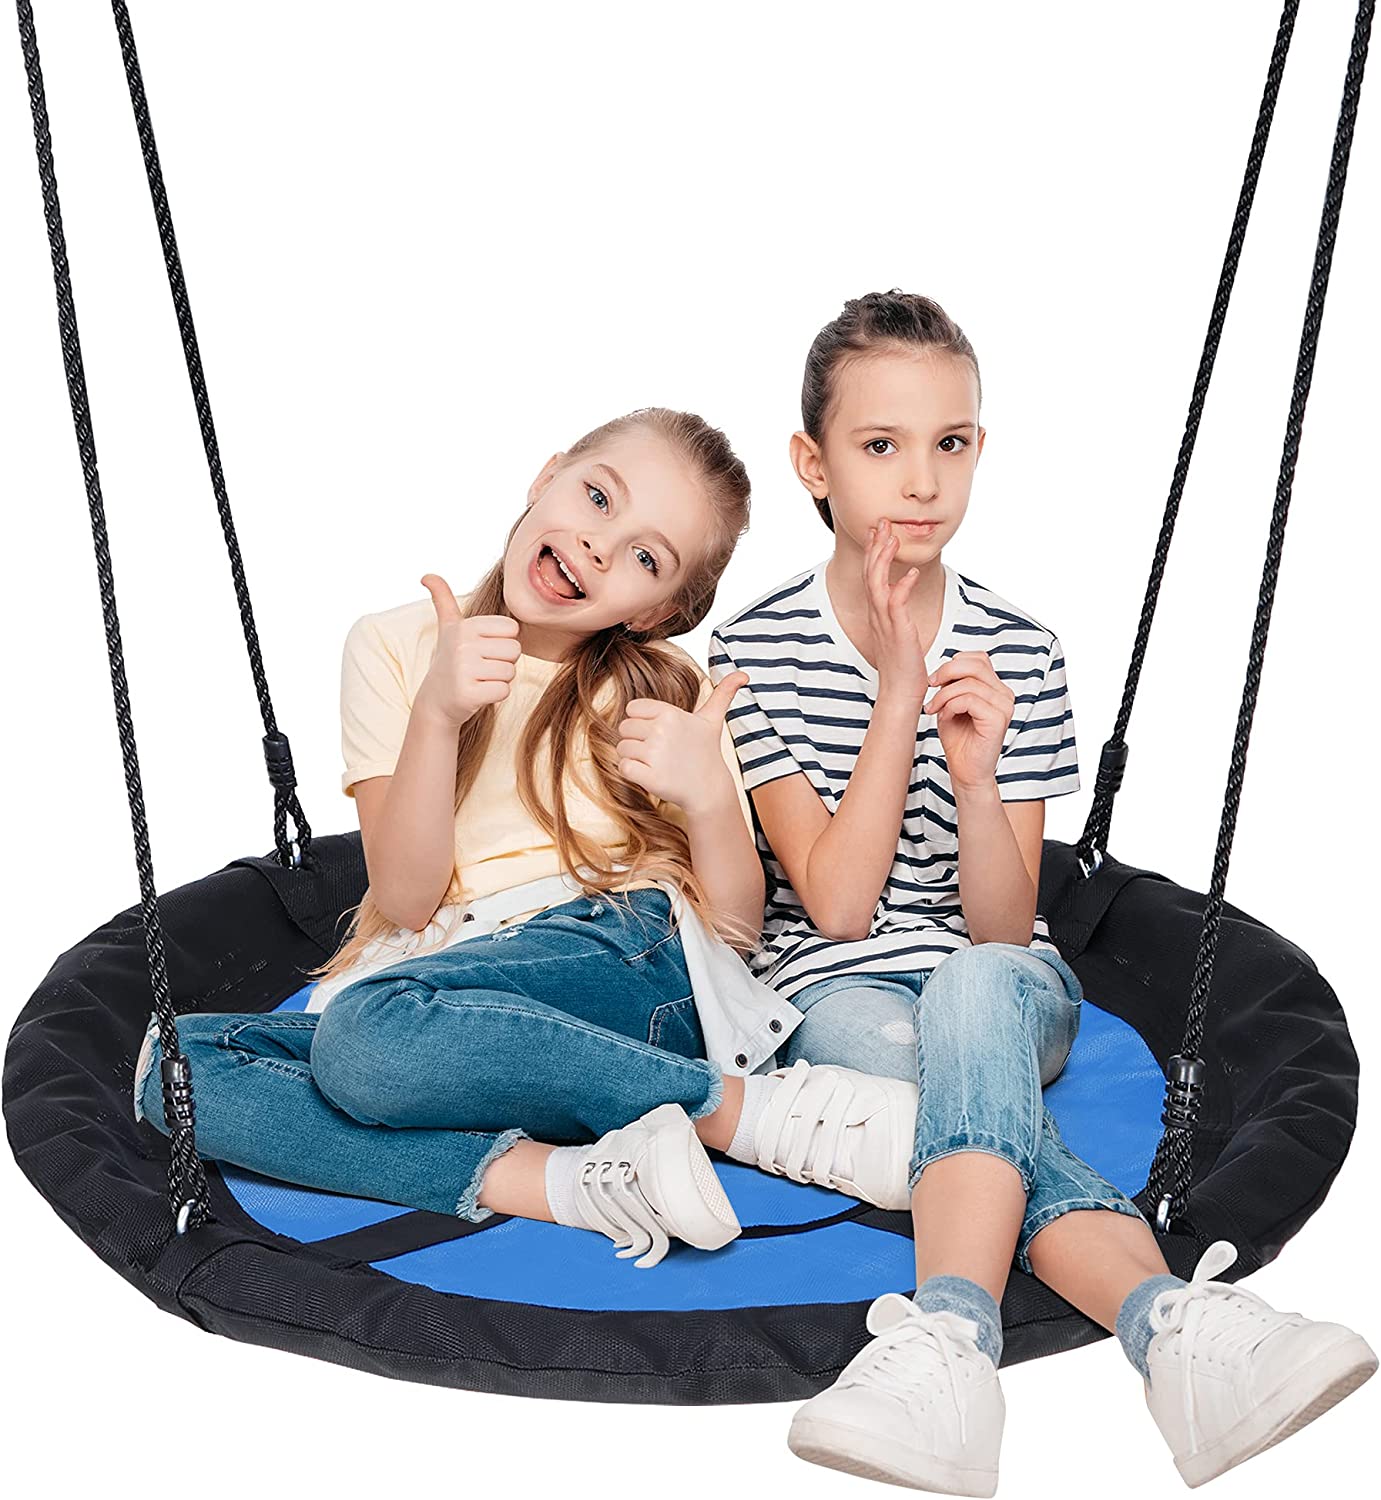 40'' Saucer Swing Web Swing Round Tree Swing for Kids Indoor Outdoor Swing Set 800lb Capacity with Carabiners, Waterproof and Steel Frame